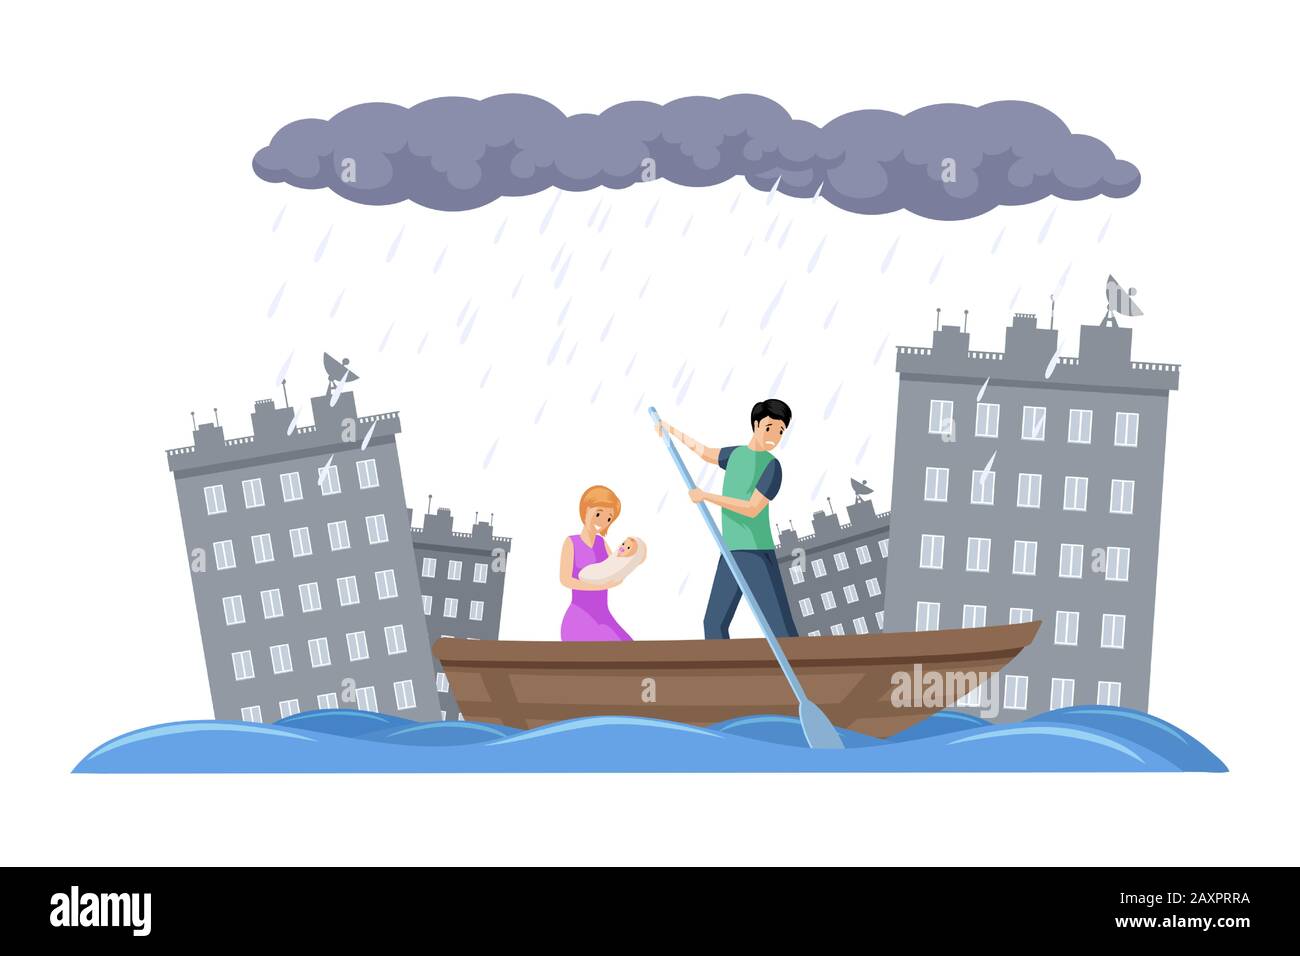 Family escapes on a boat from the flood in a city vector flat illustration. Natural disaster, floating city buildings, cataclysm concept. Man, woman and their child evacuating during the storm. Stock Vector